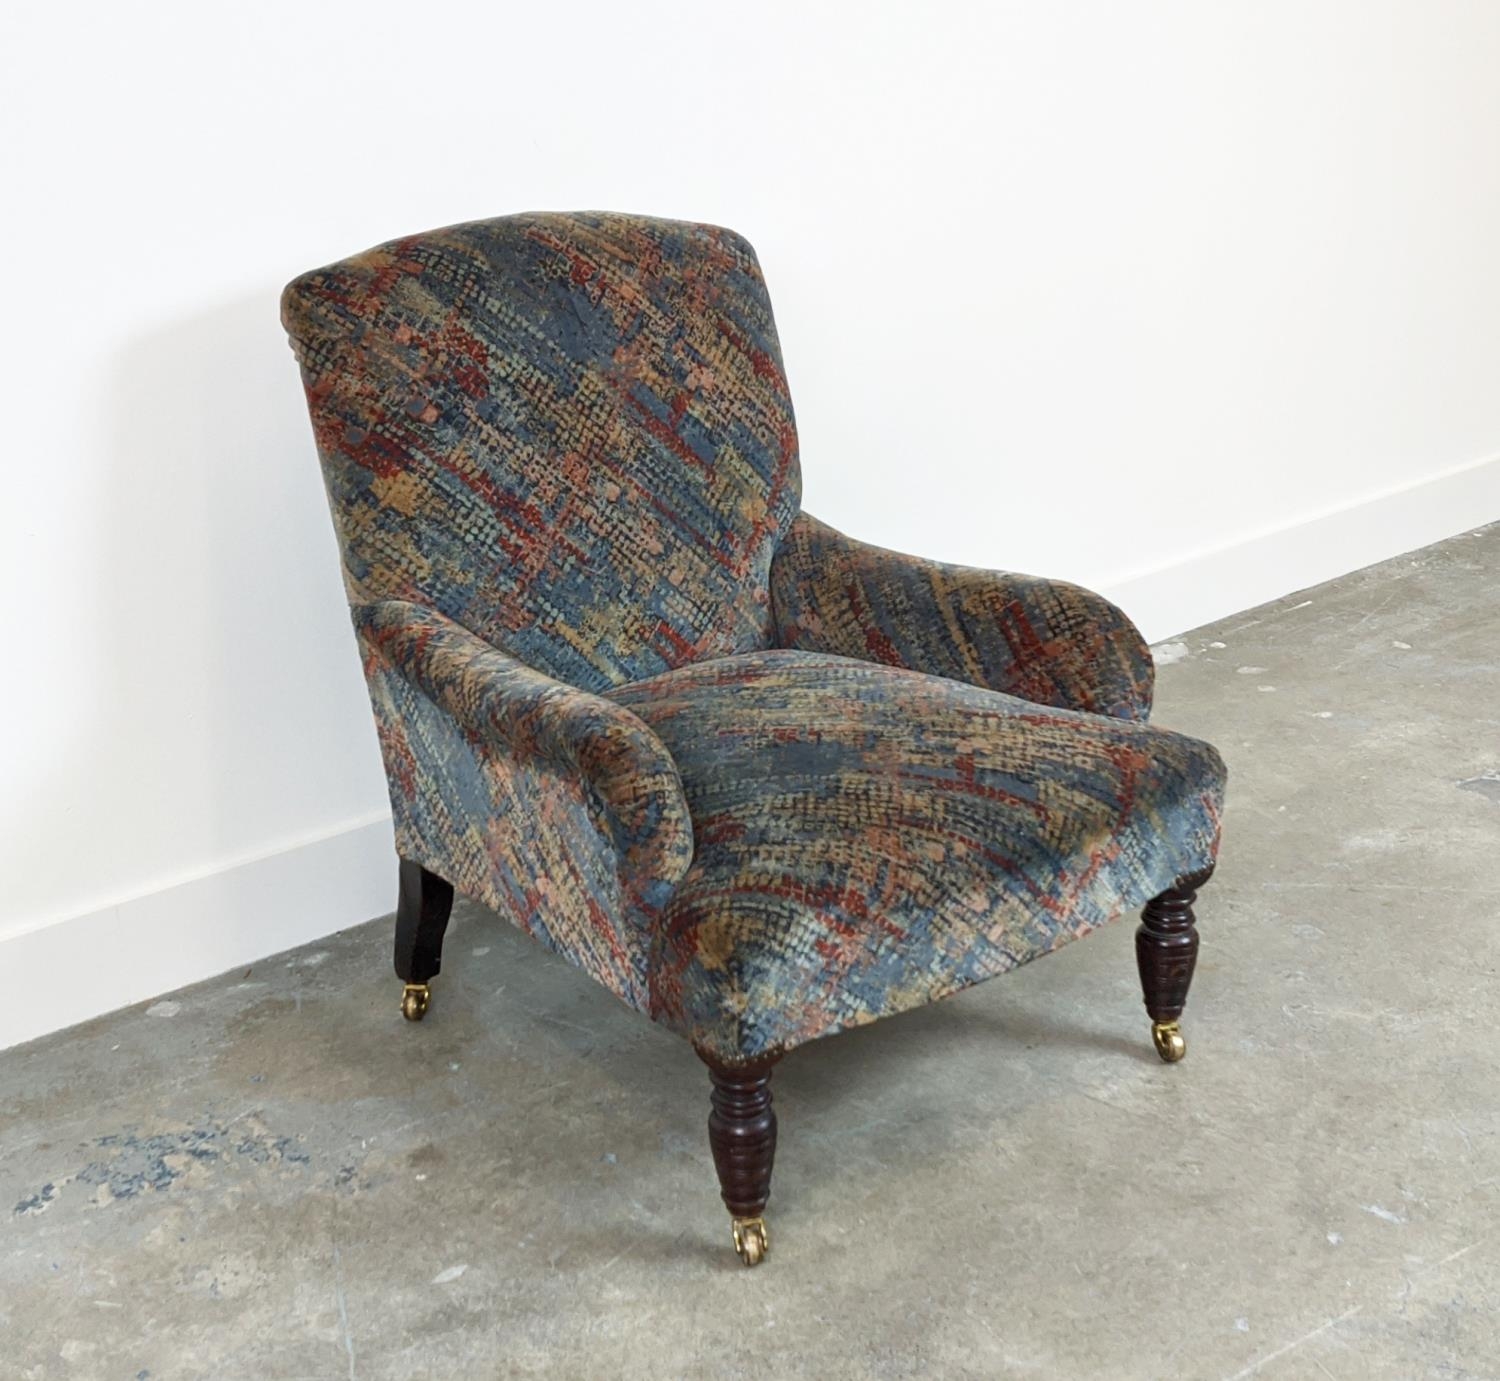 ARMCHAIR, late Victorian mahogany in patterned grey velvet on brass castors, 78cm H x 65cm x 74cm. - Image 2 of 7